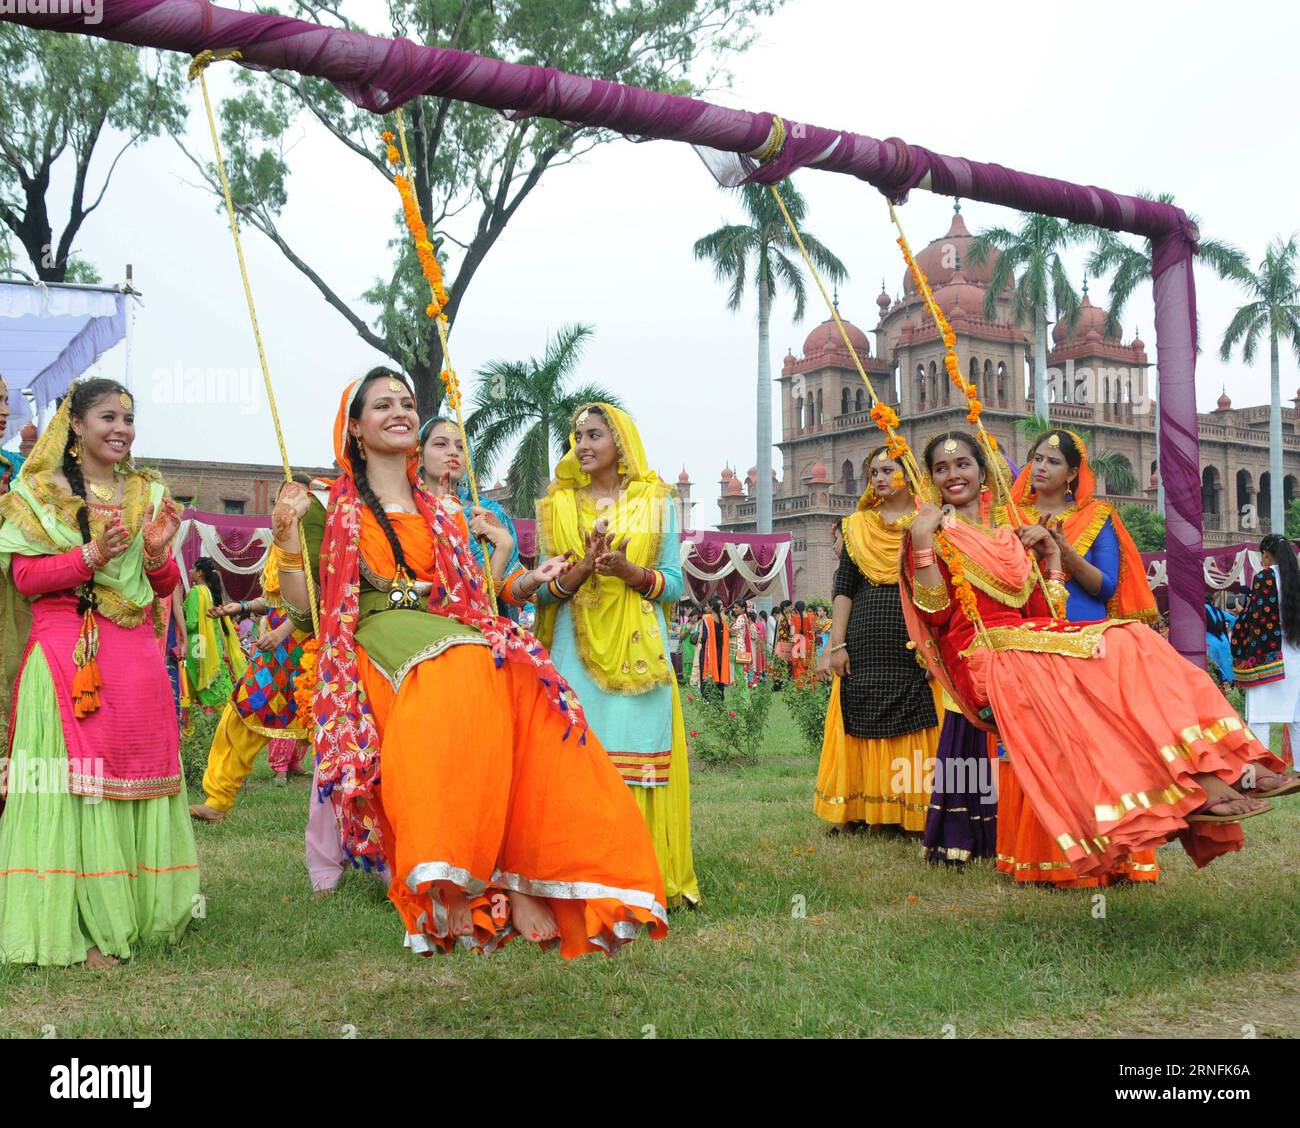 (160813) -- AMRITSAR (INDIA), Aug. 13, 2016 -- College girls wearing traditional Punjabi dresses swing during the celebration of Teej Festival in Amritsar, India, Aug. 13, 2016. Teej is a generic name for a number of festivals celebrated among females to welcome monsoon season in northern and western India and Nepal. ) (wtc) INDIA-AMRITSAR-TEEJ FESTIVAL-CELEBRATION stringer PUBLICATIONxNOTxINxCHN   160813 Amritsar India Aug 13 2016 College Girls Wearing Traditional Punjabi Dresses Swing during The Celebration of Teej Festival in Amritsar India Aug 13 2016 Teej IS a generic Name for a Number of Stock Photo